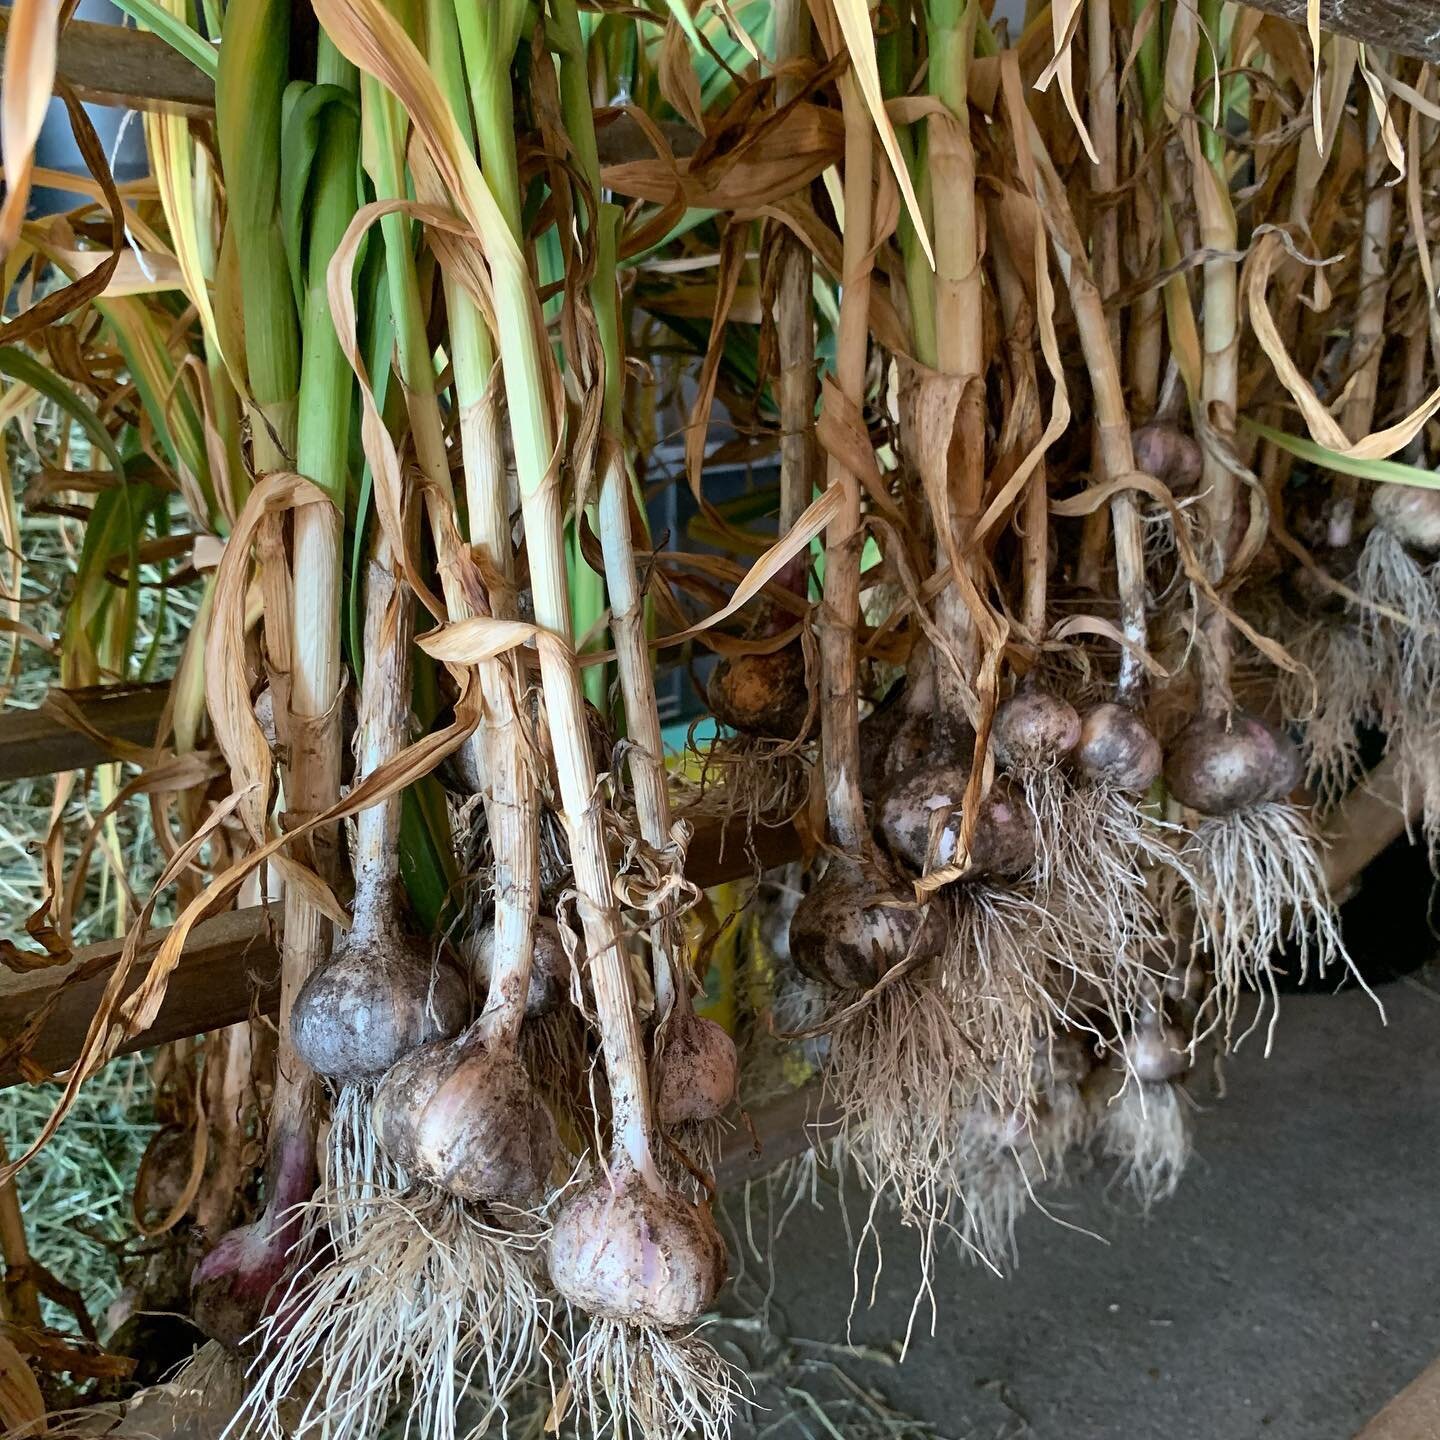 Not sure what I was thinking ( or maybe I wasn&rsquo;t!) when I planted so much garlic last year. A huge harvest, and plenty to share!
.
.
.
.
.
.
.
.
#garlic
#organicgarlic
#garlicharvest
#organicgardening
#groworganic
#johnnysselectedseeds